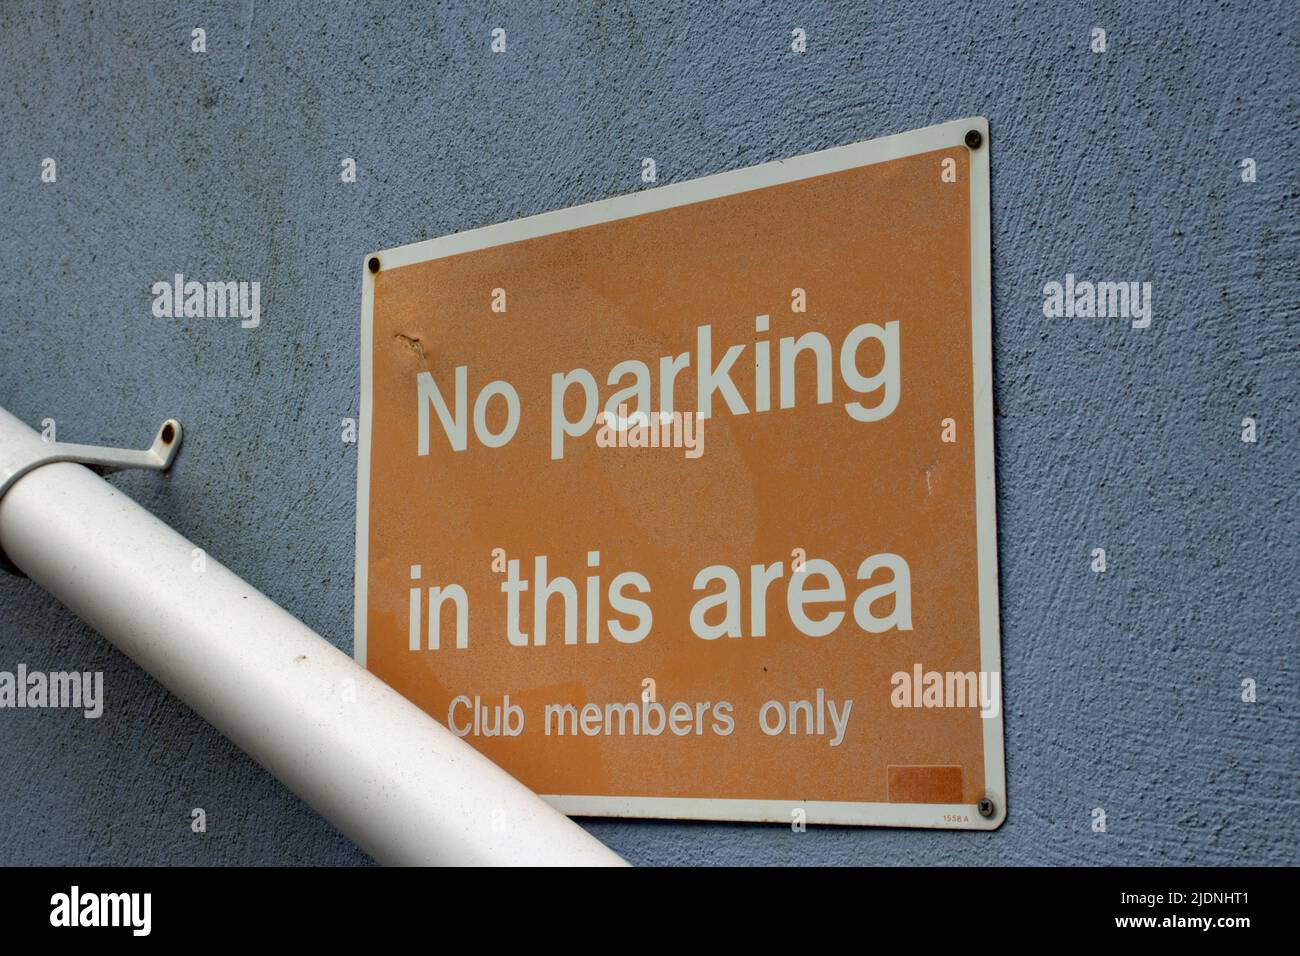 No parking in this area - club members only sign in white letters on an orange background fixed to a cement wall with a drain pipe below Stock Photo